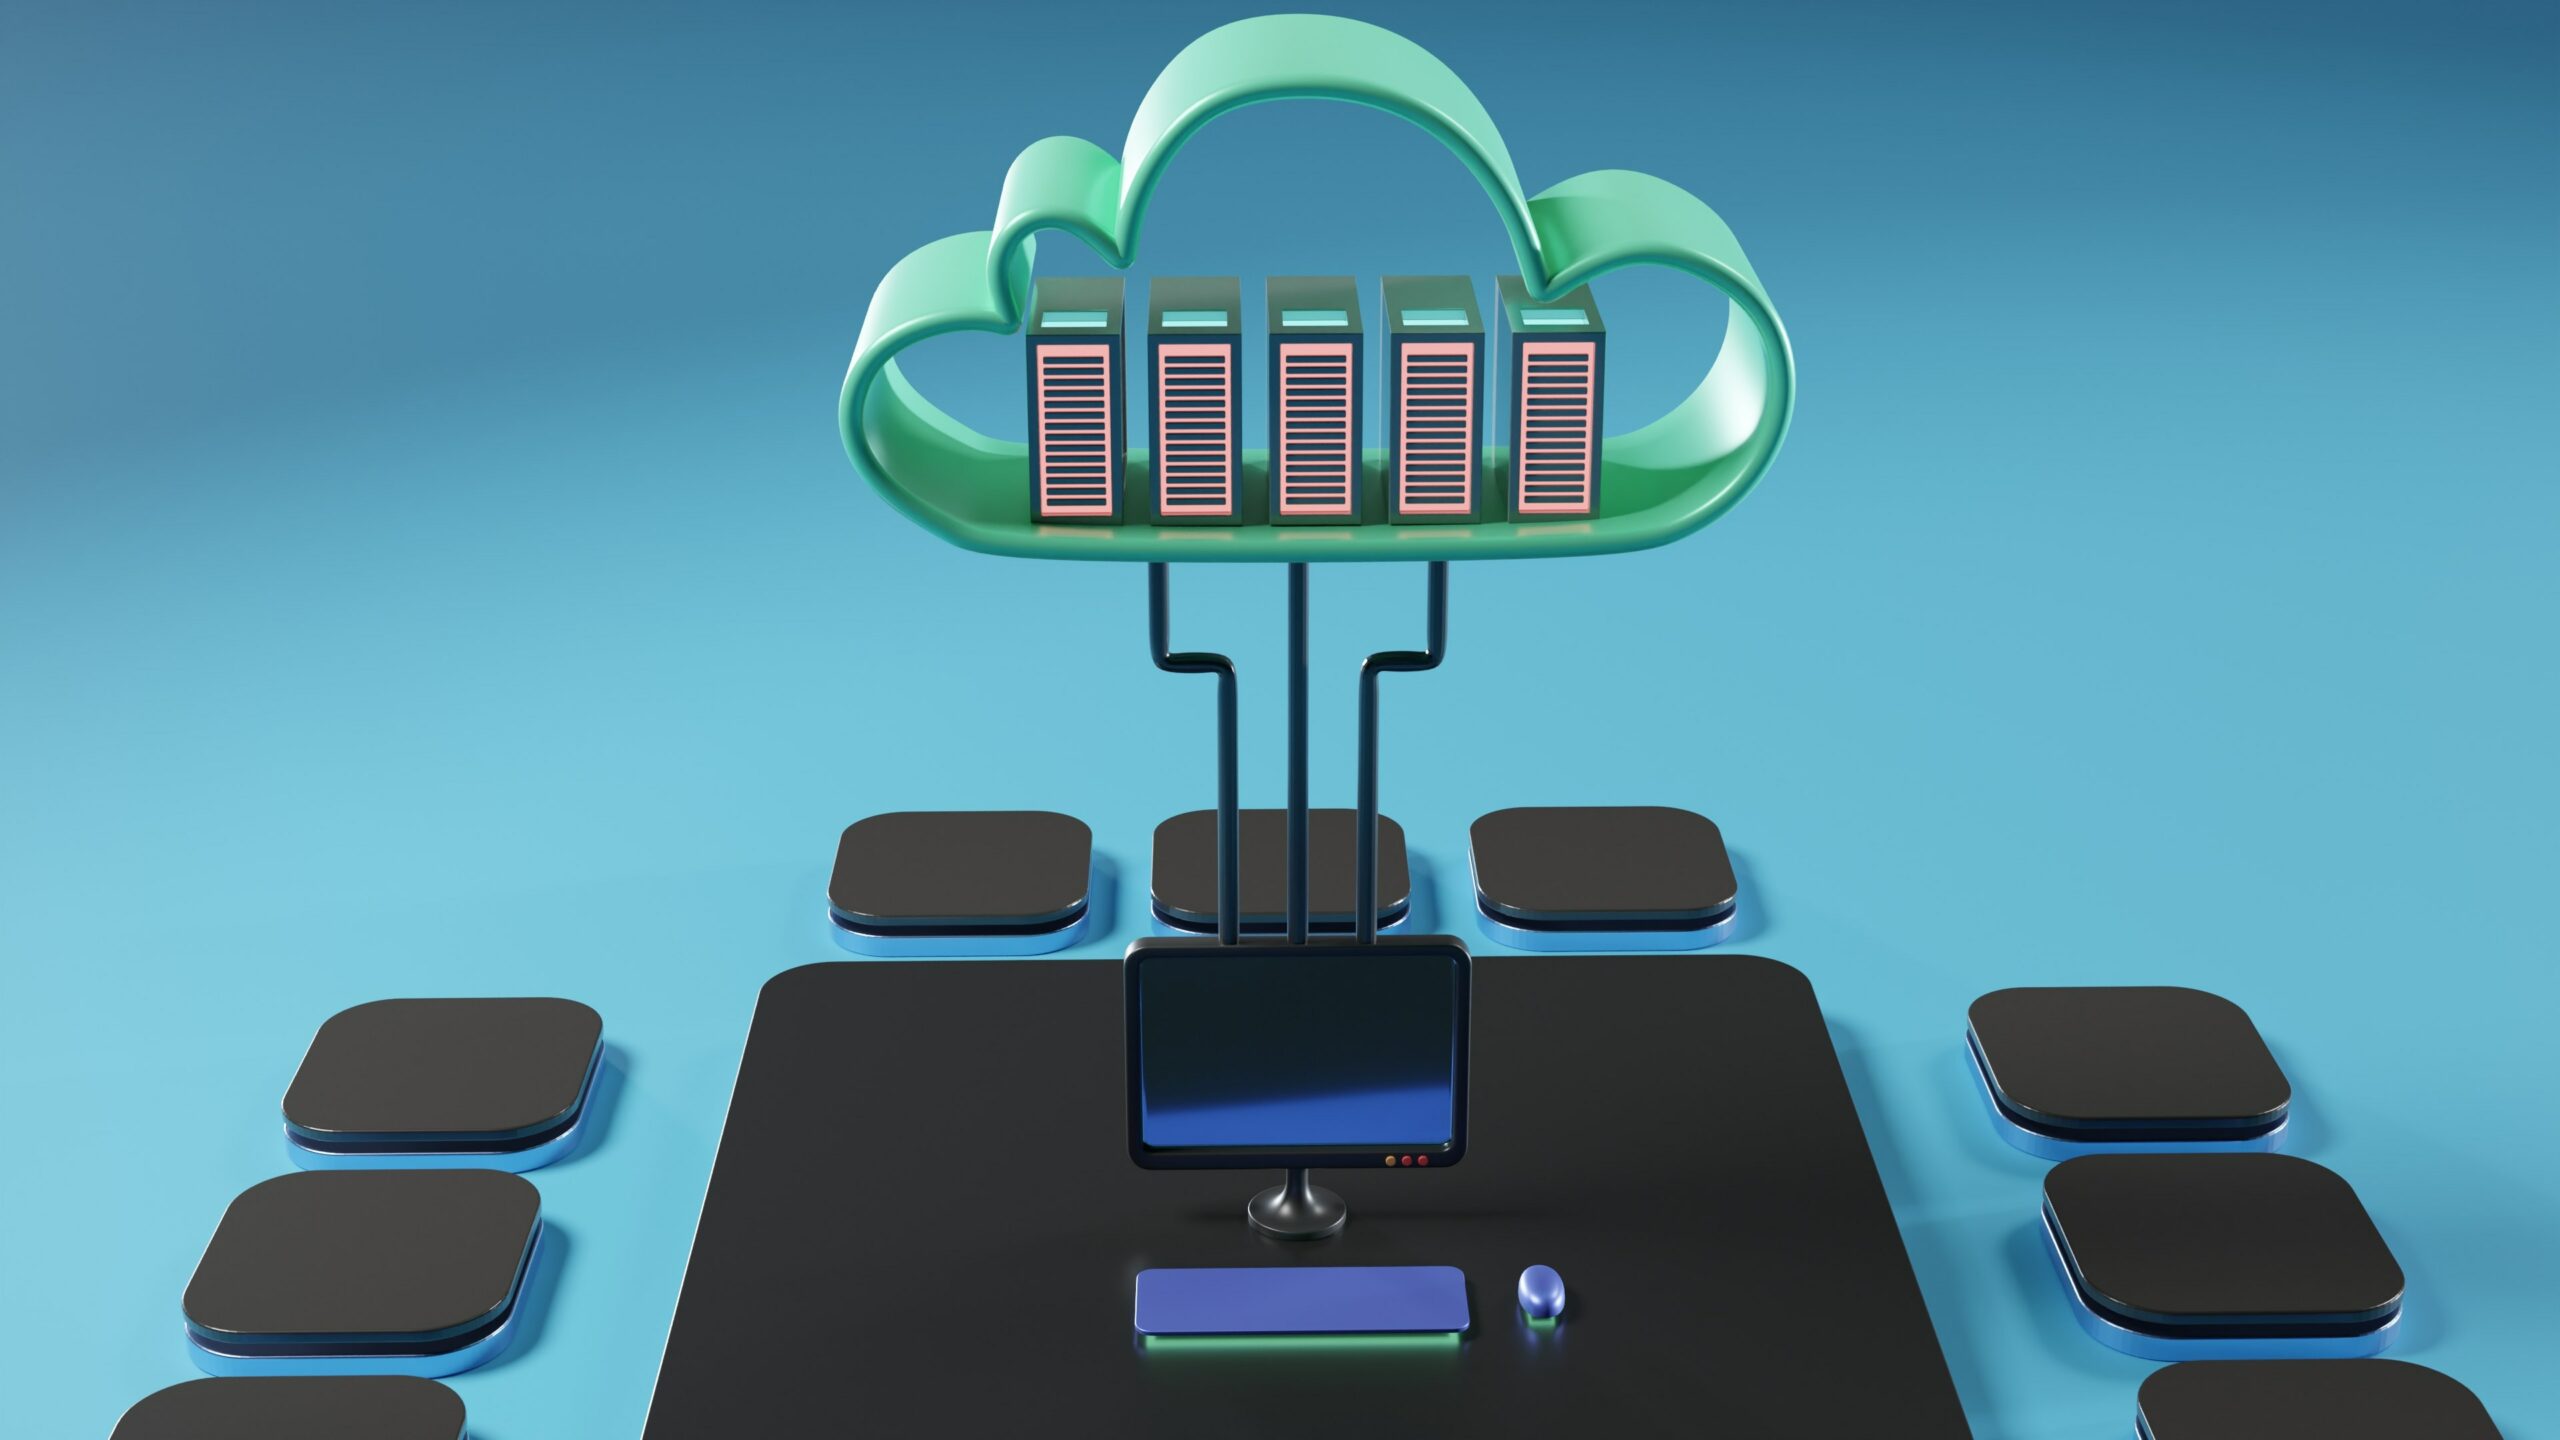 image of cloud server, with green cloud and blue background | phoenixNAP